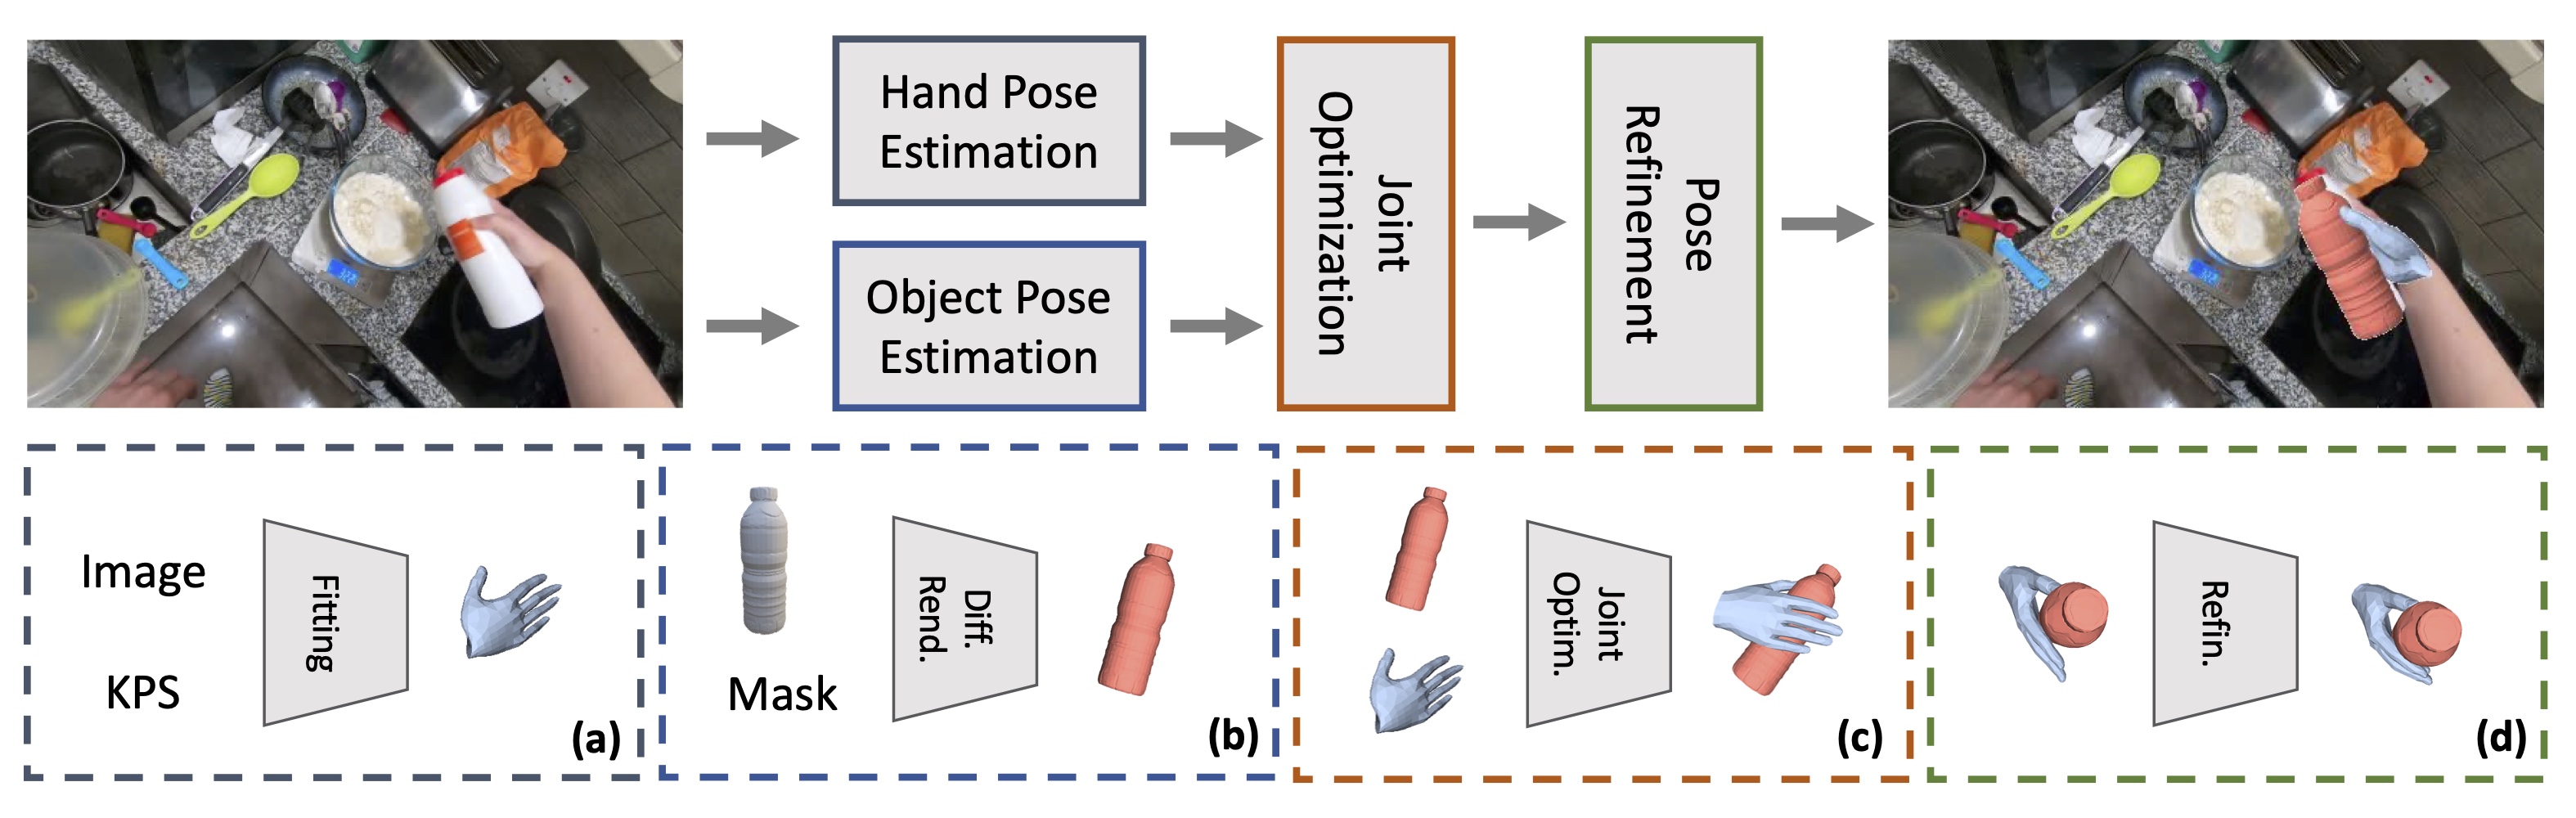 GitHub - NVlabs/Deep_Object_Pose: Deep Object Pose Estimation (DOPE) – ROS  inference (CoRL 2018)